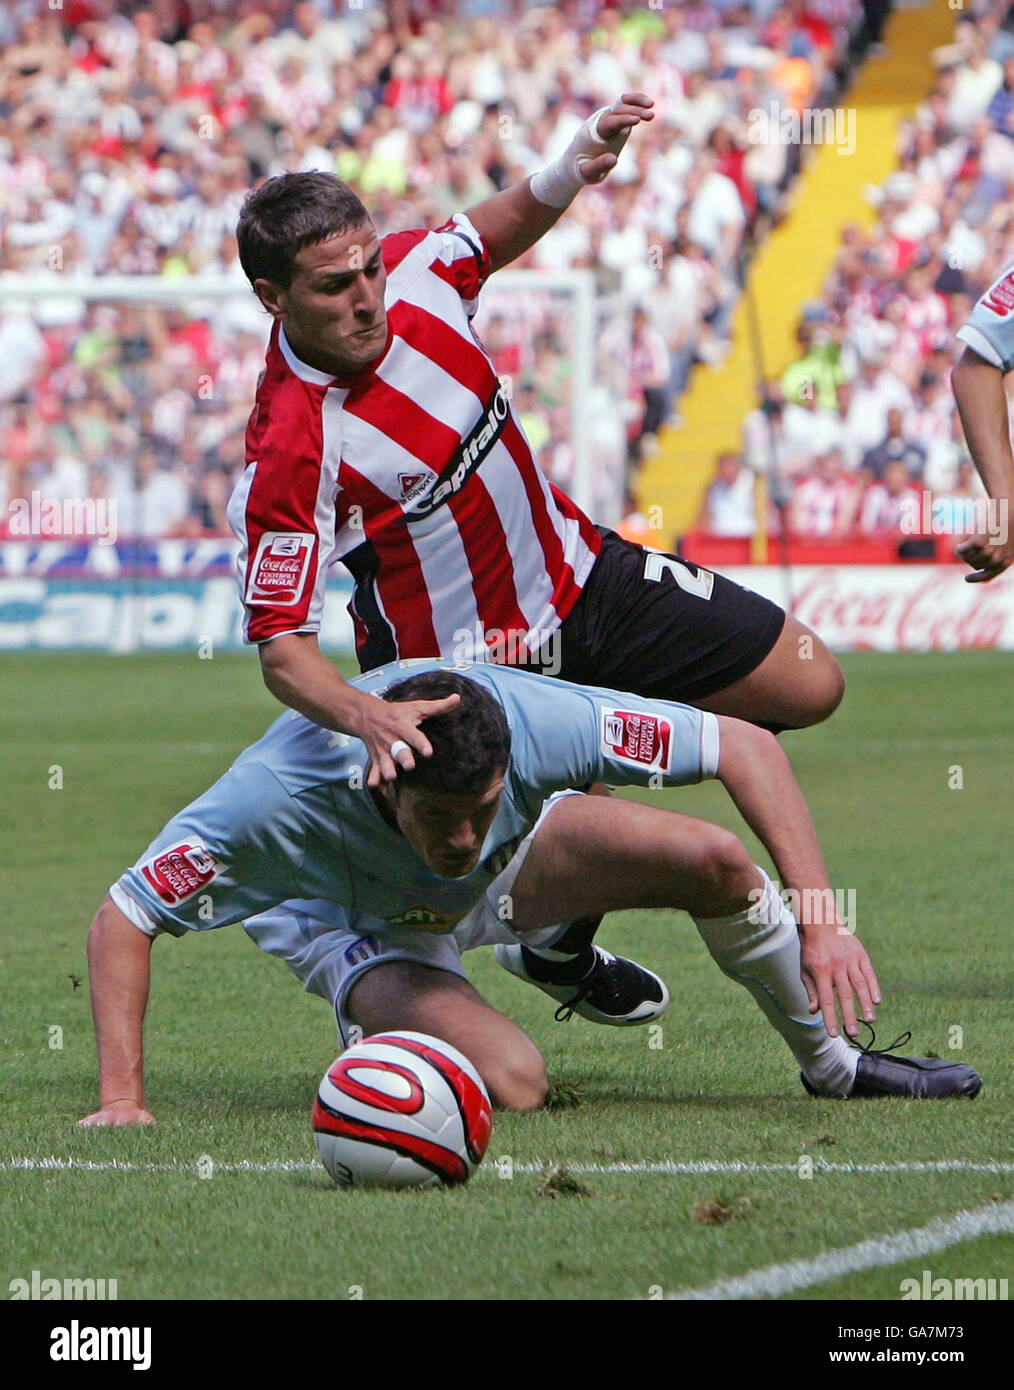 Sheffield United's Billy Sharp runs over Colchester United's Pat Baldwin during the Coca-Cola Football League Championship match at Bramall Lane, Sheffield. Stock Photo